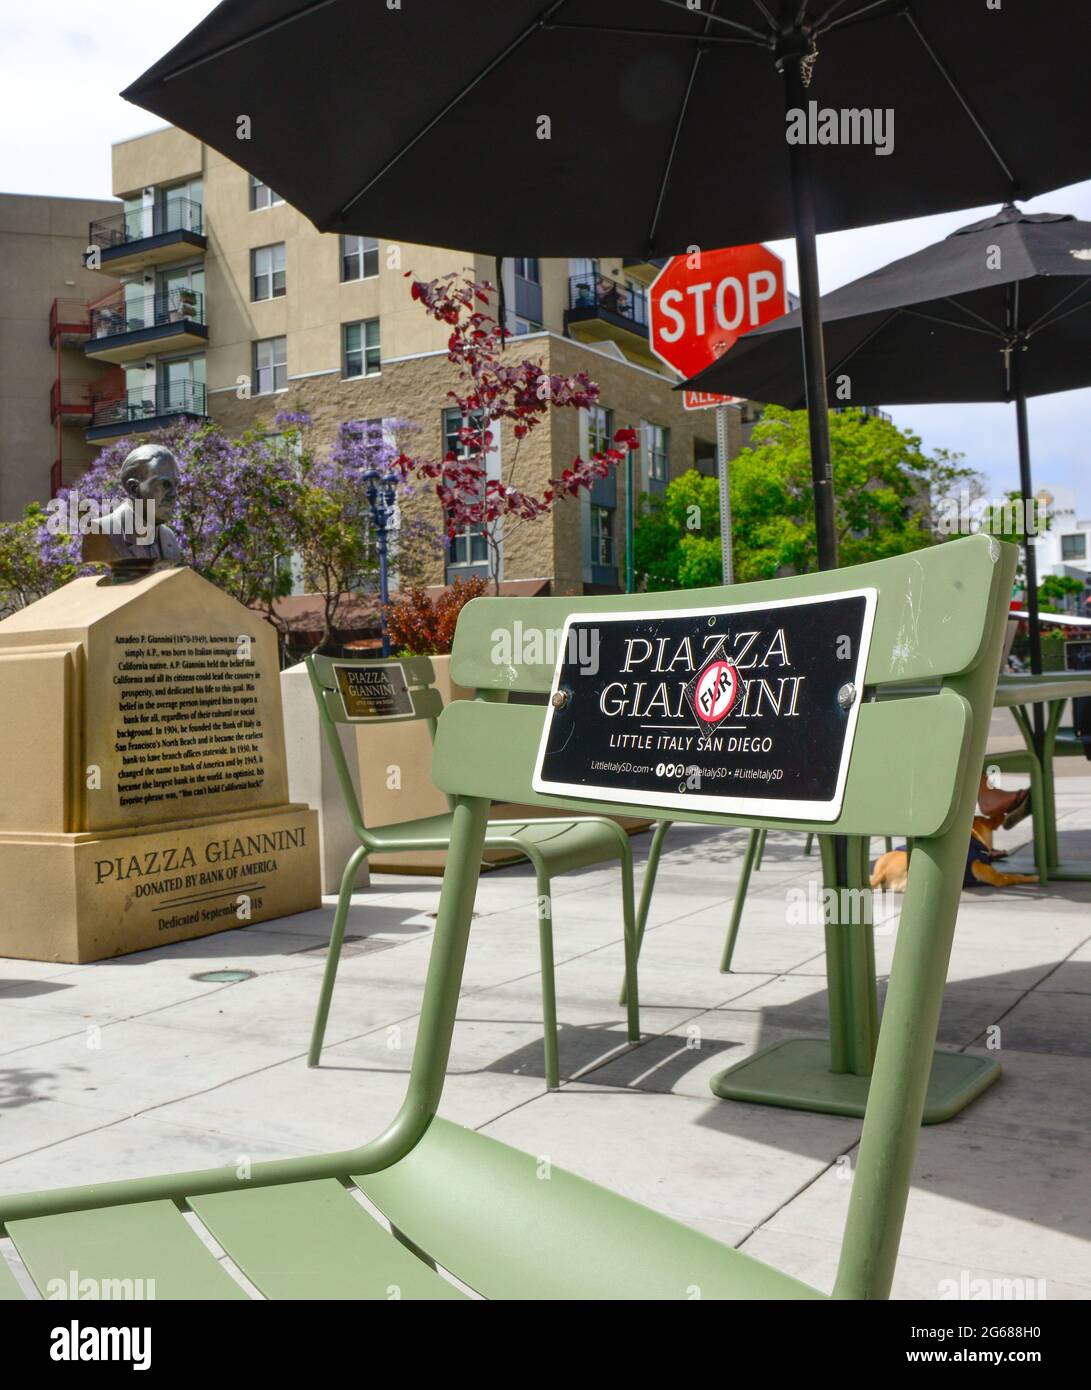 A green metal patio chair with signage for Piazza Giannini, (Note no fur sticker) Amadeo Giannini, honored banker with nearby statue in San Diego, CA Stock Photo